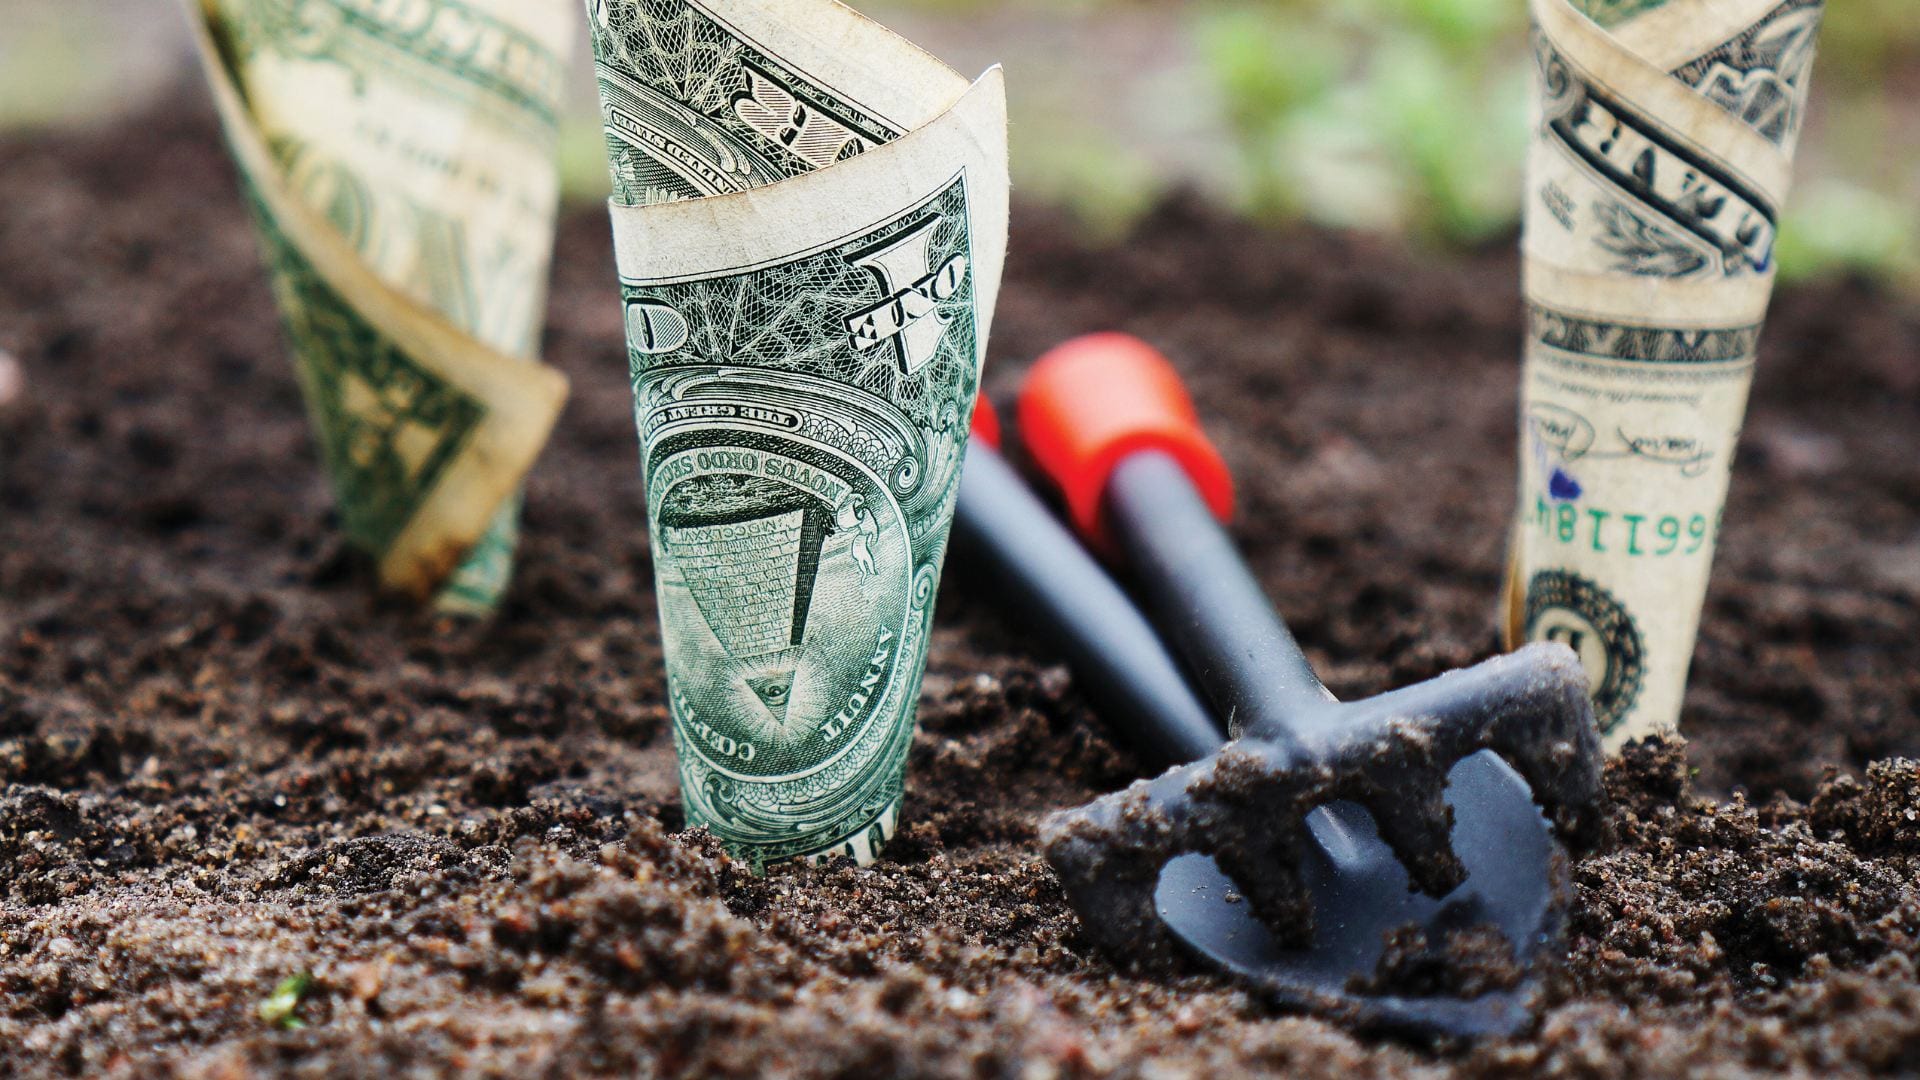 Dollar bills stuck in the ground, as if they are growing from the ground, next to a trowel